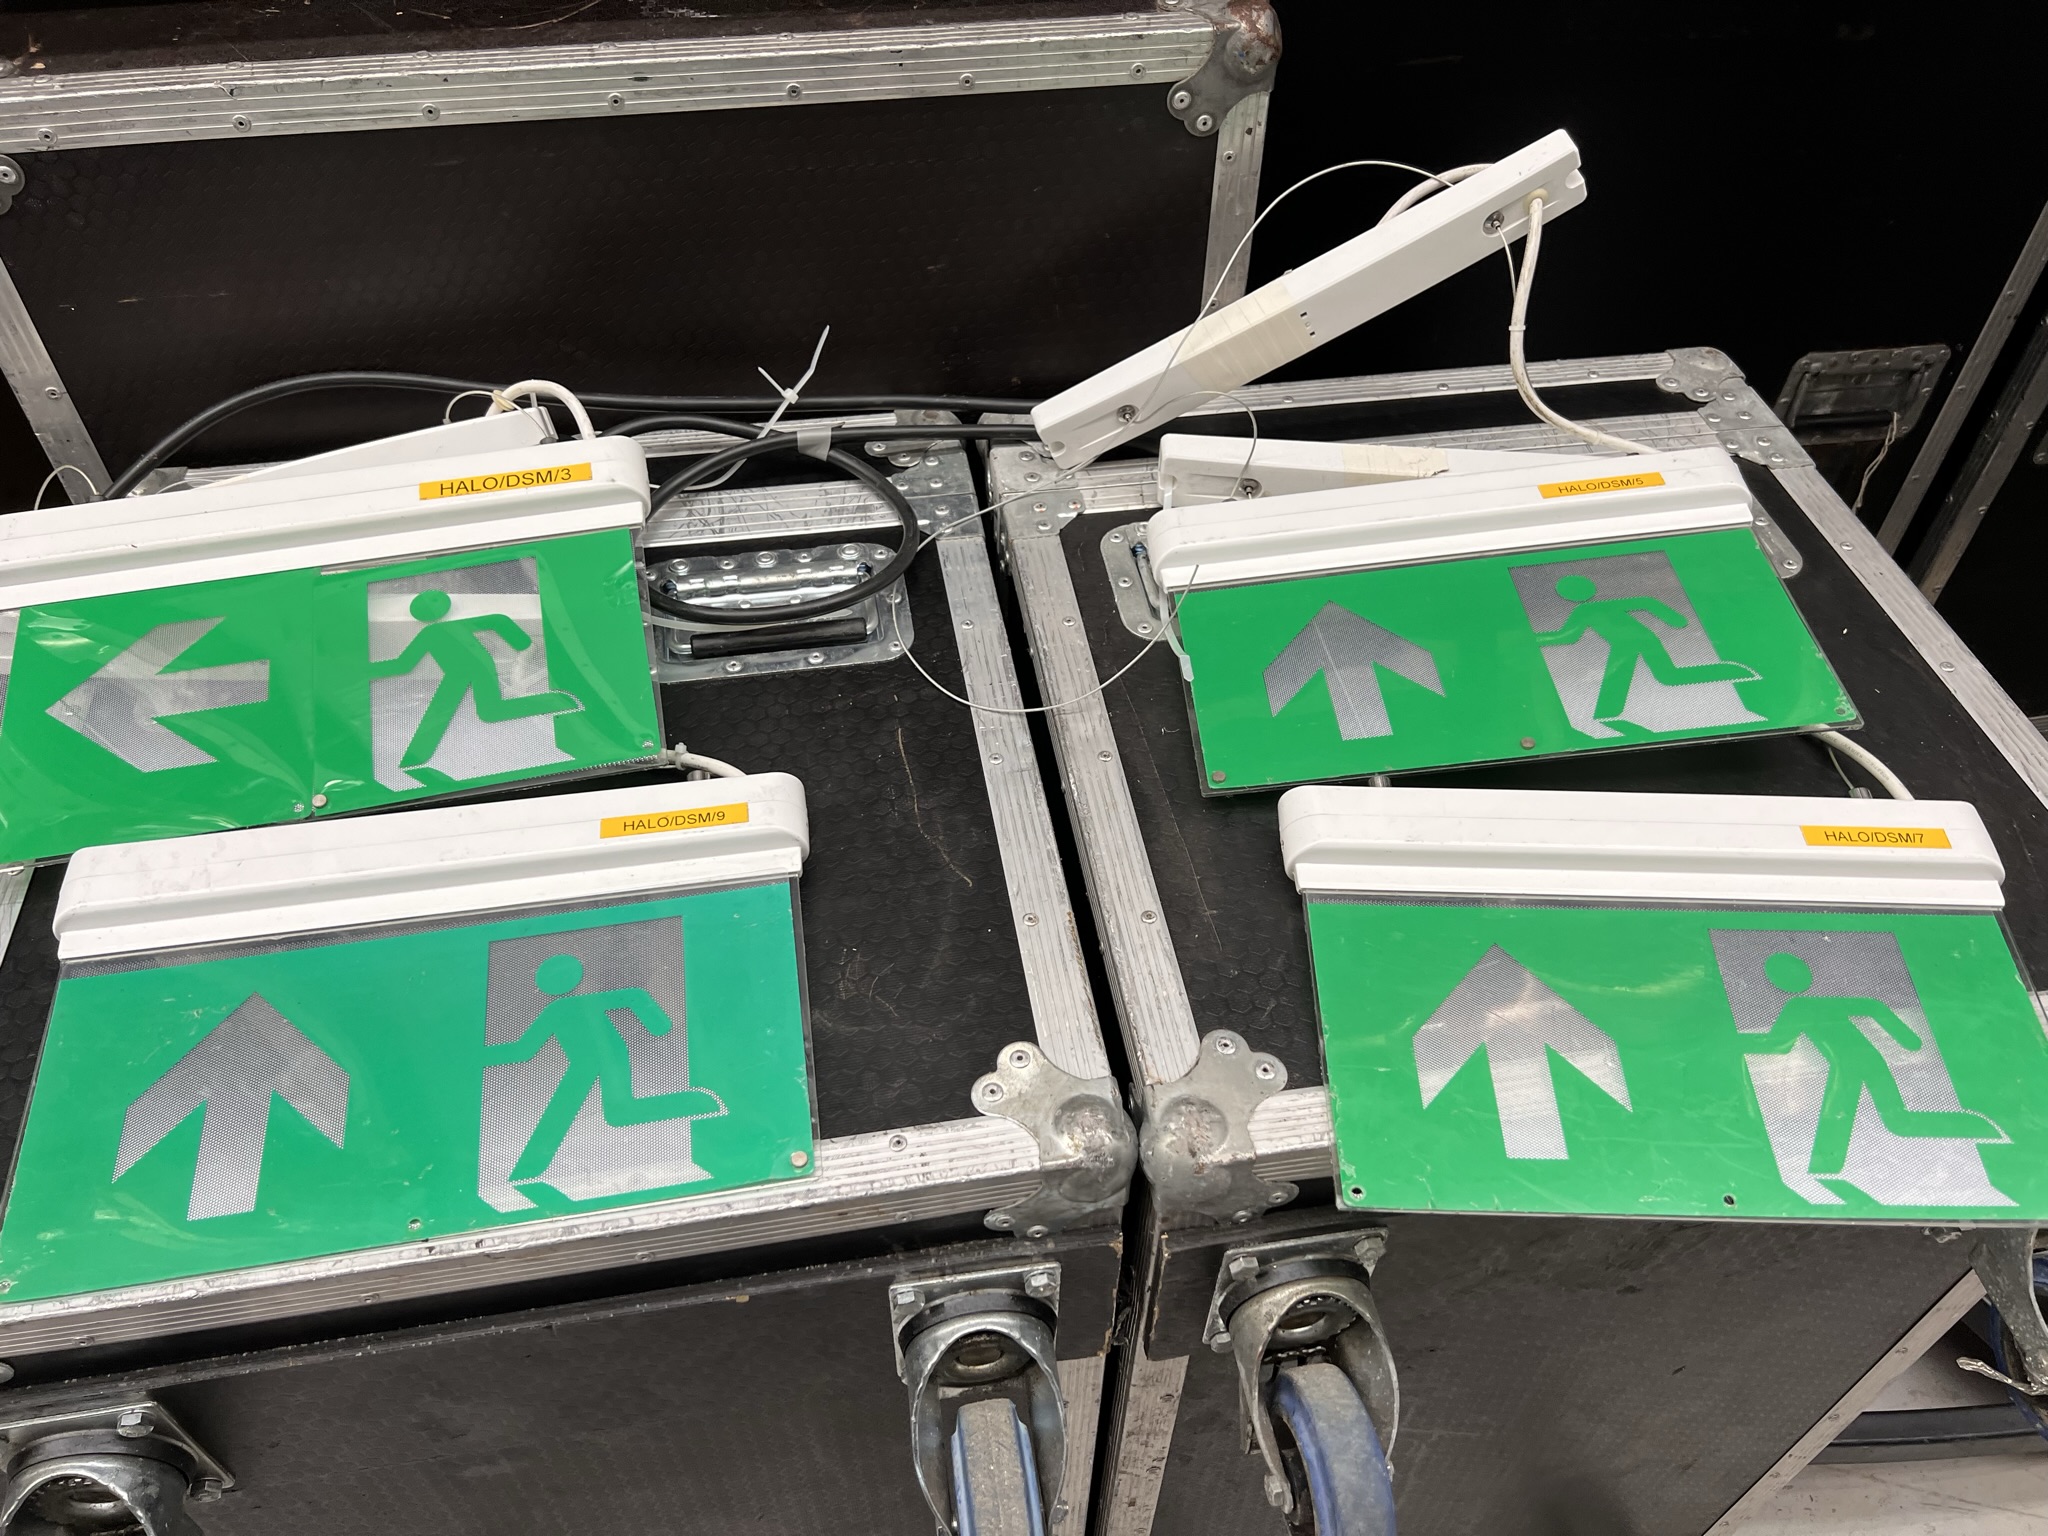 4x Small Hanging Emergency Exit Signs